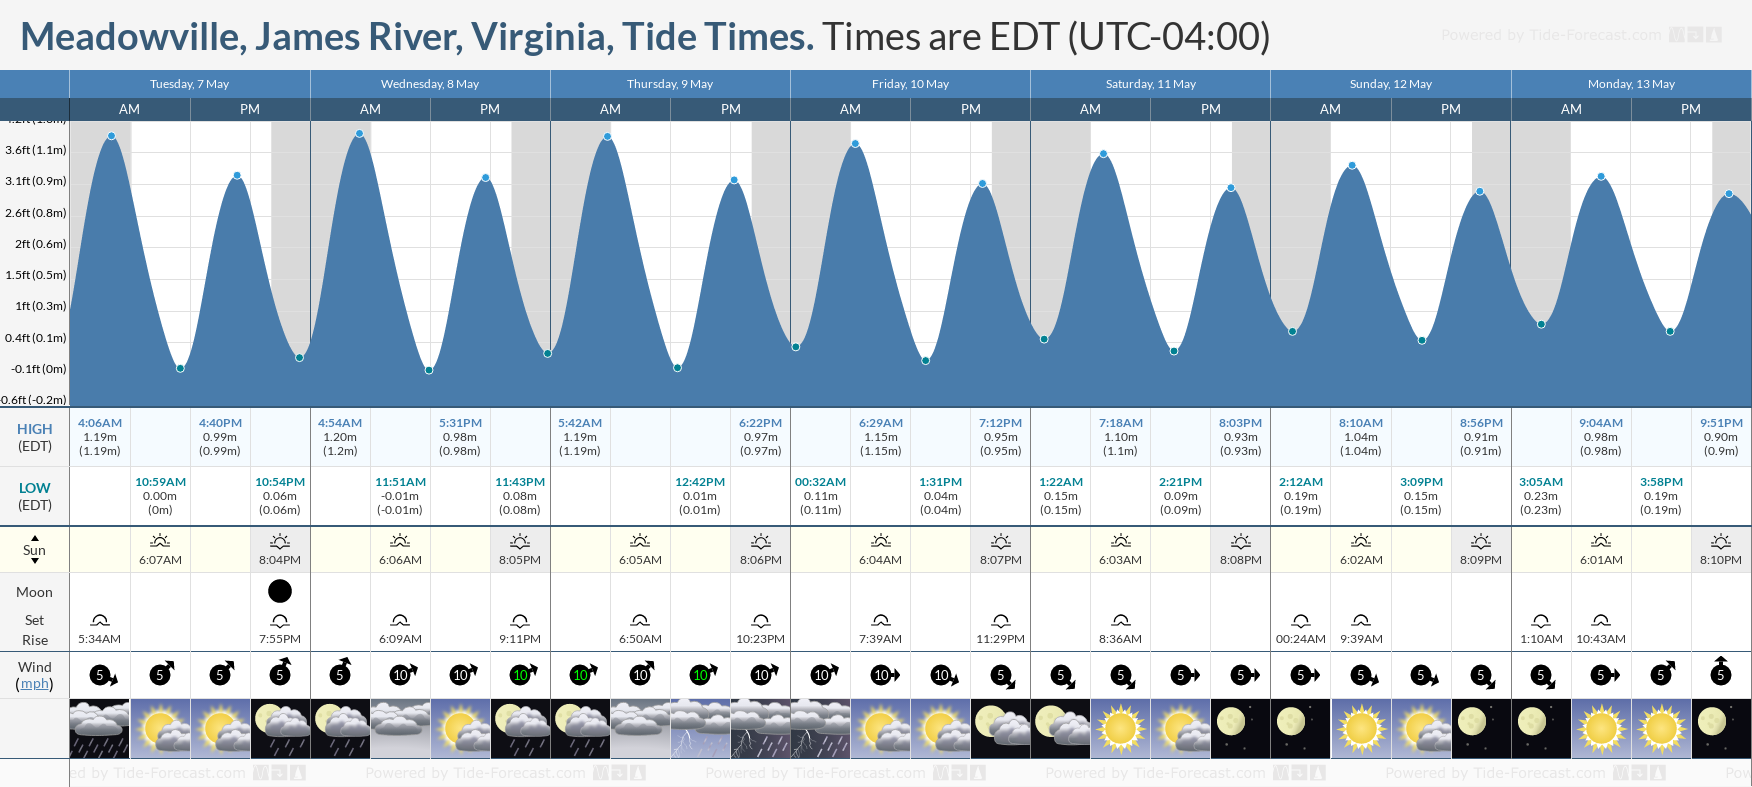 Meadowville, James River, Virginia Tide Chart including high and low tide tide times for the next 7 days